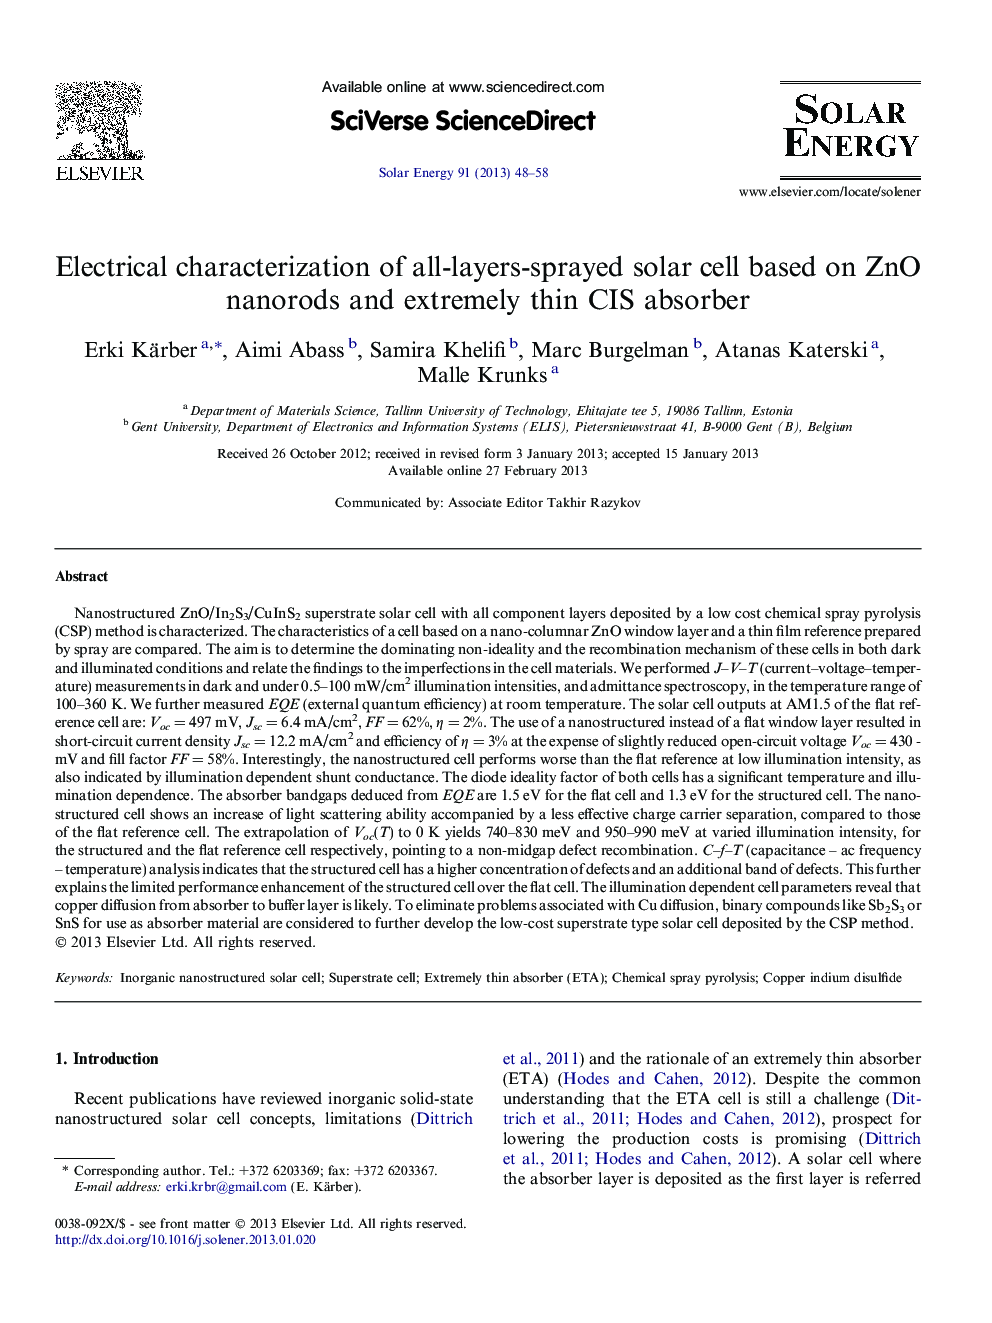 Electrical characterization of all-layers-sprayed solar cell based on ZnO nanorods and extremely thin CIS absorber